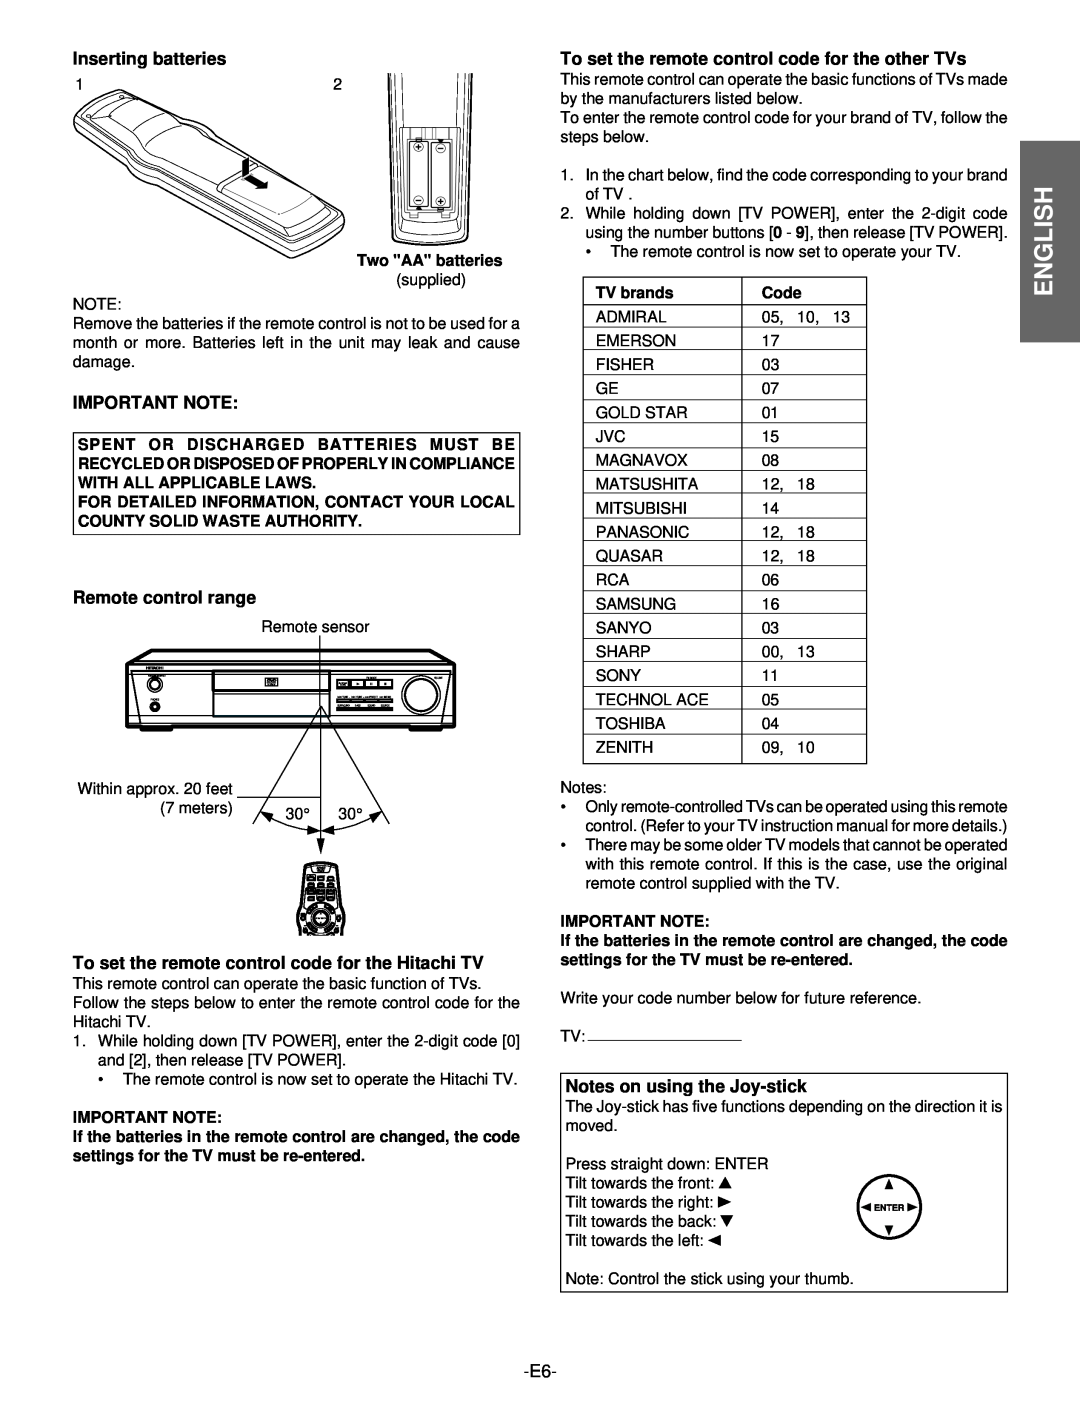 Hitachi DV-S522U instruction manual English, Two AA batteries supplied, Important Note, TV brands, Code 